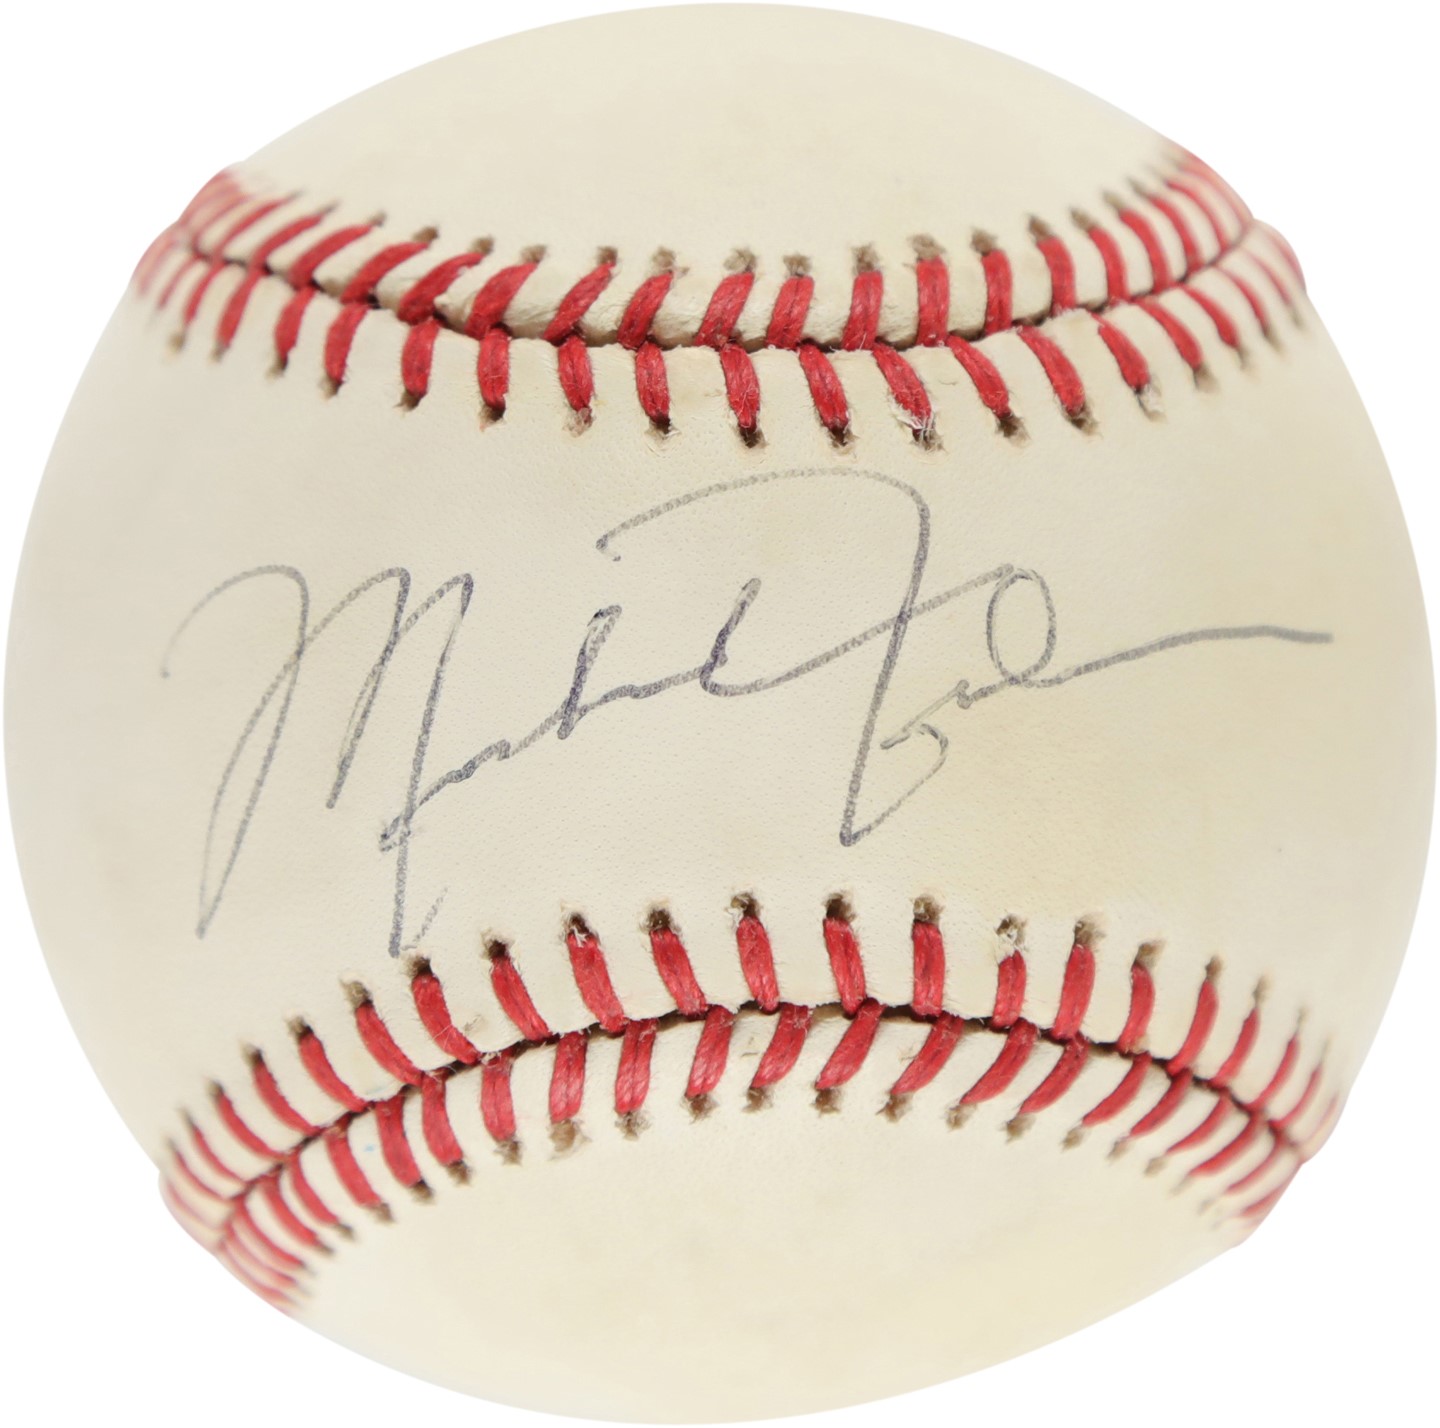 Michael Jordan Single-Signed Baseball Obtained in Person by White Sox Scout (PSA)